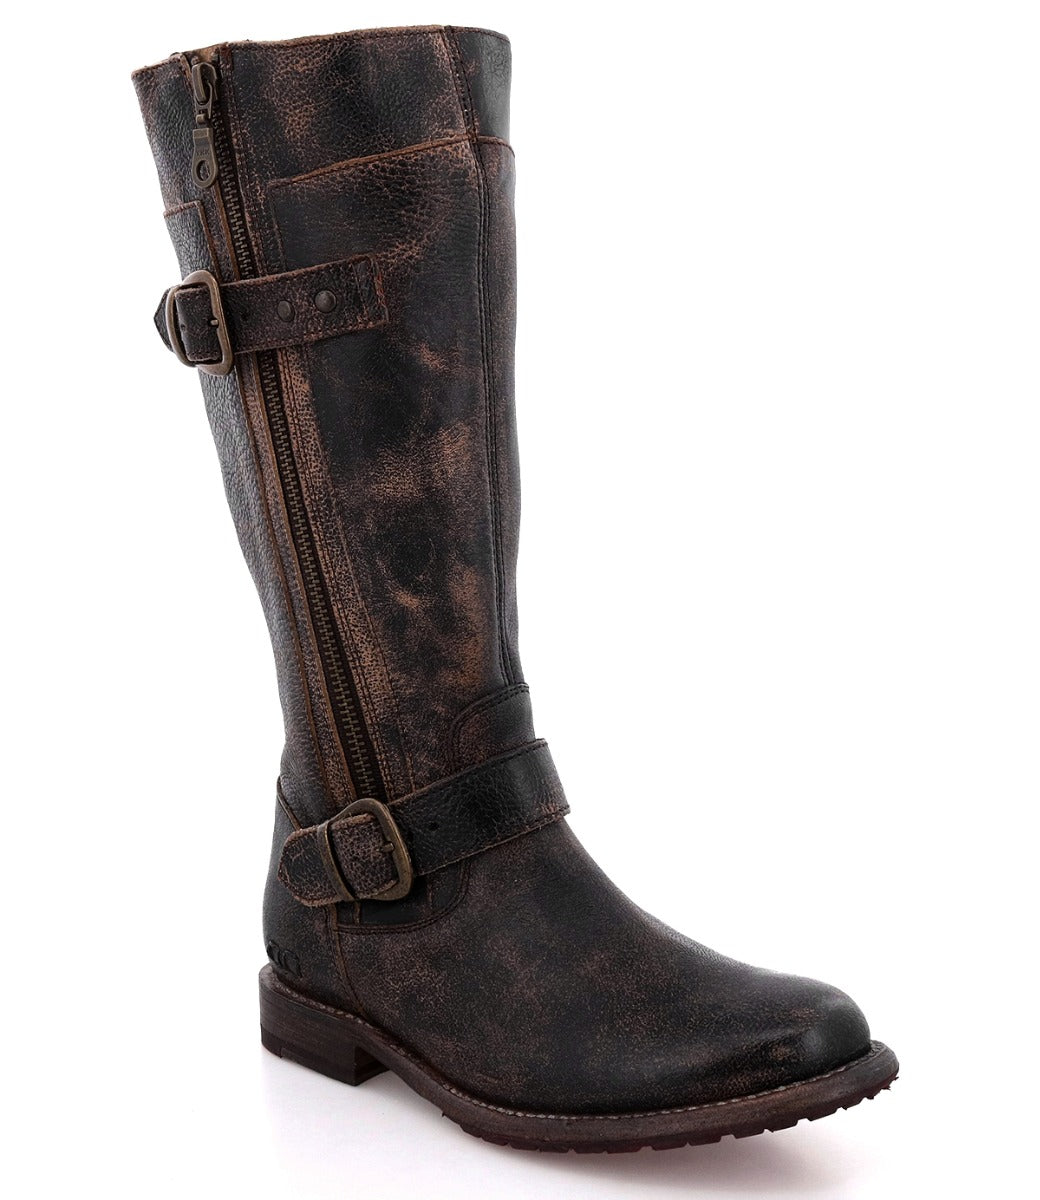 A women's black leather Gogo Lug boot with Bed Stu buckles.